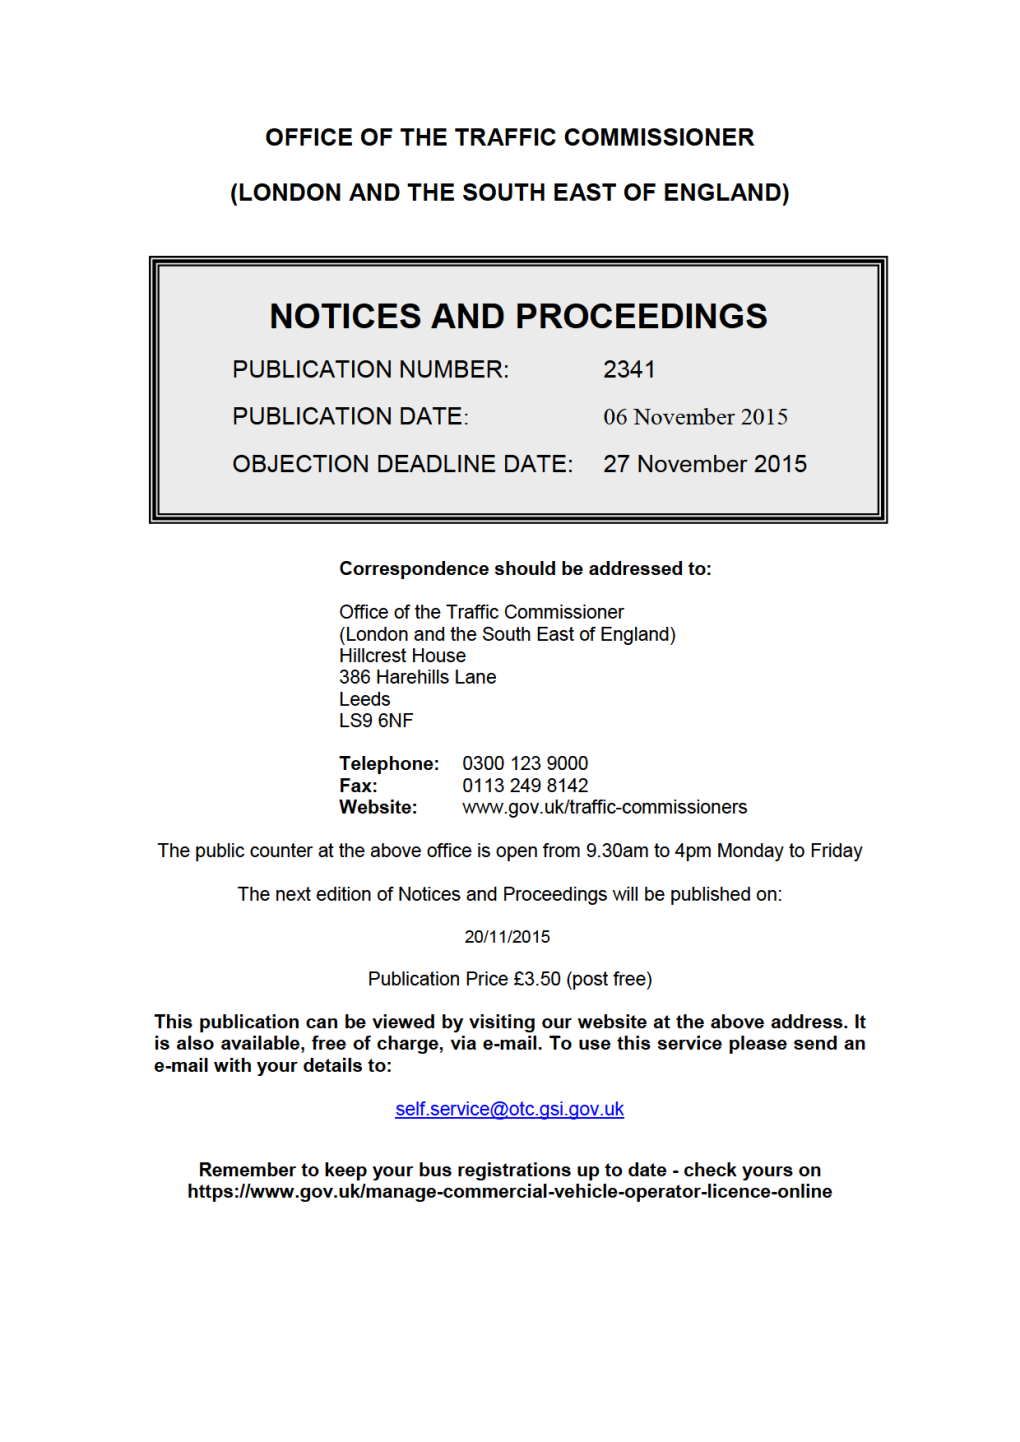 NOTICES and PROCEEDINGS 6 November 2015